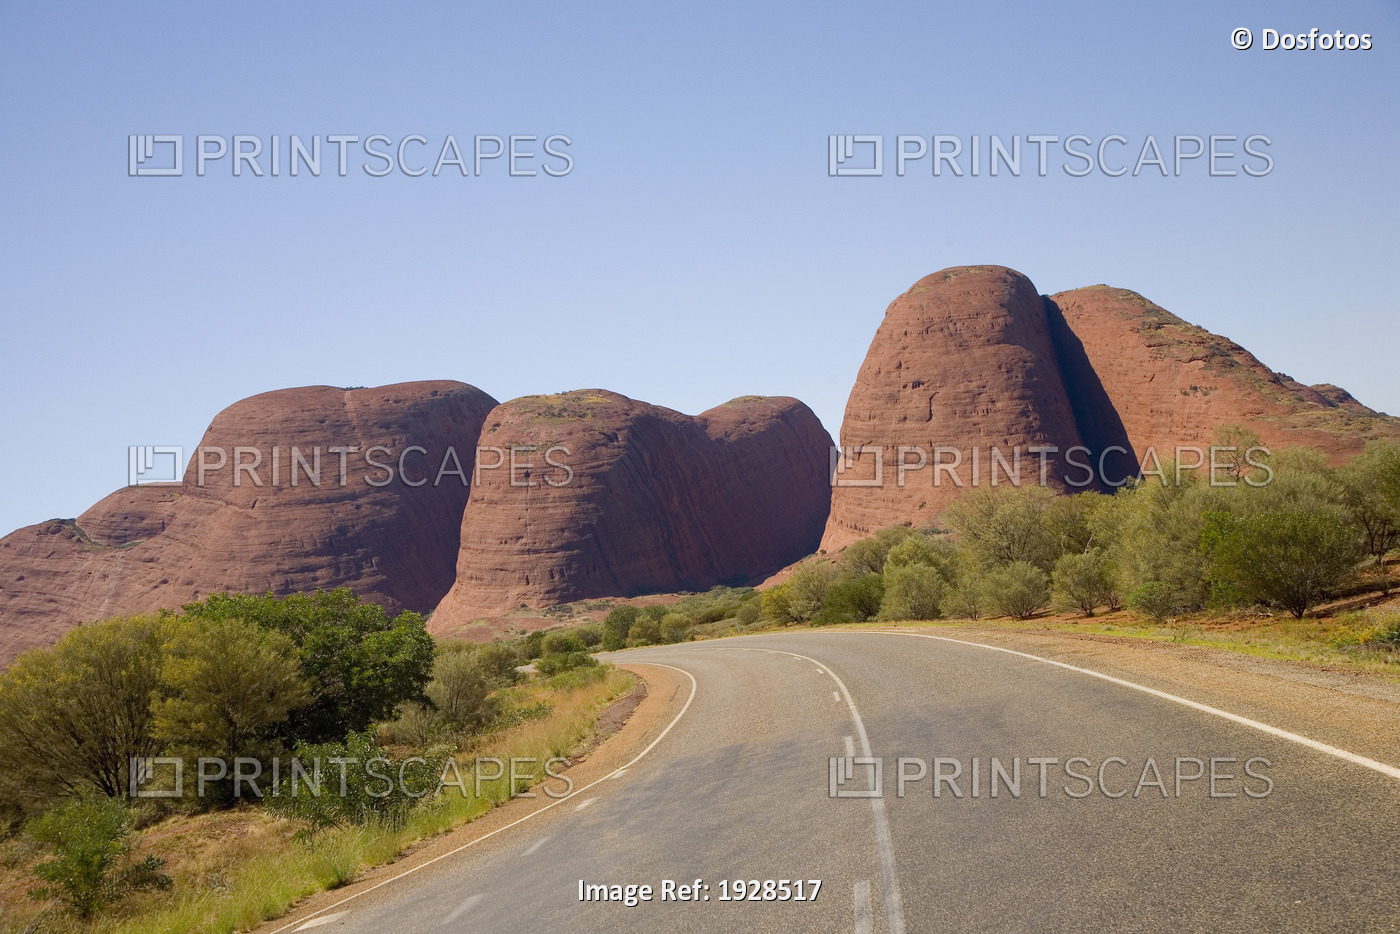 The Large Domed Rock Formations Of The Olgas, Northern Territory, Australia